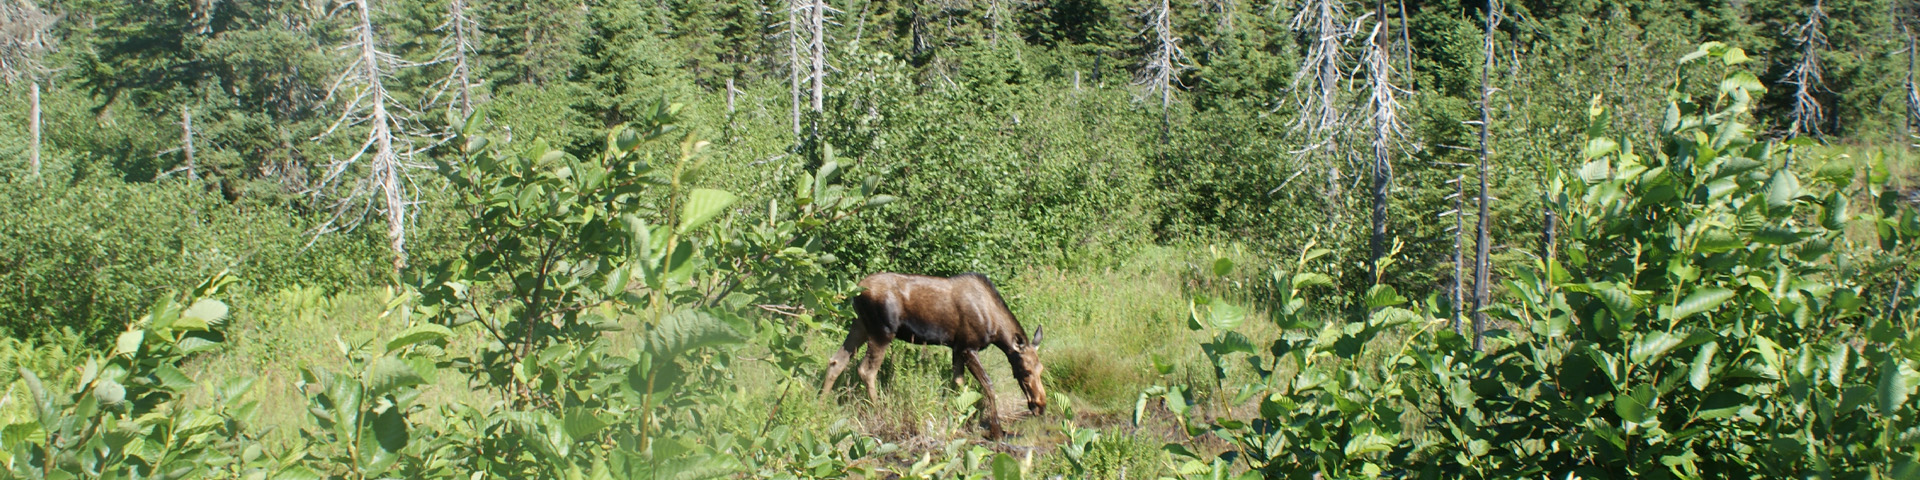 a moose eating in a forest